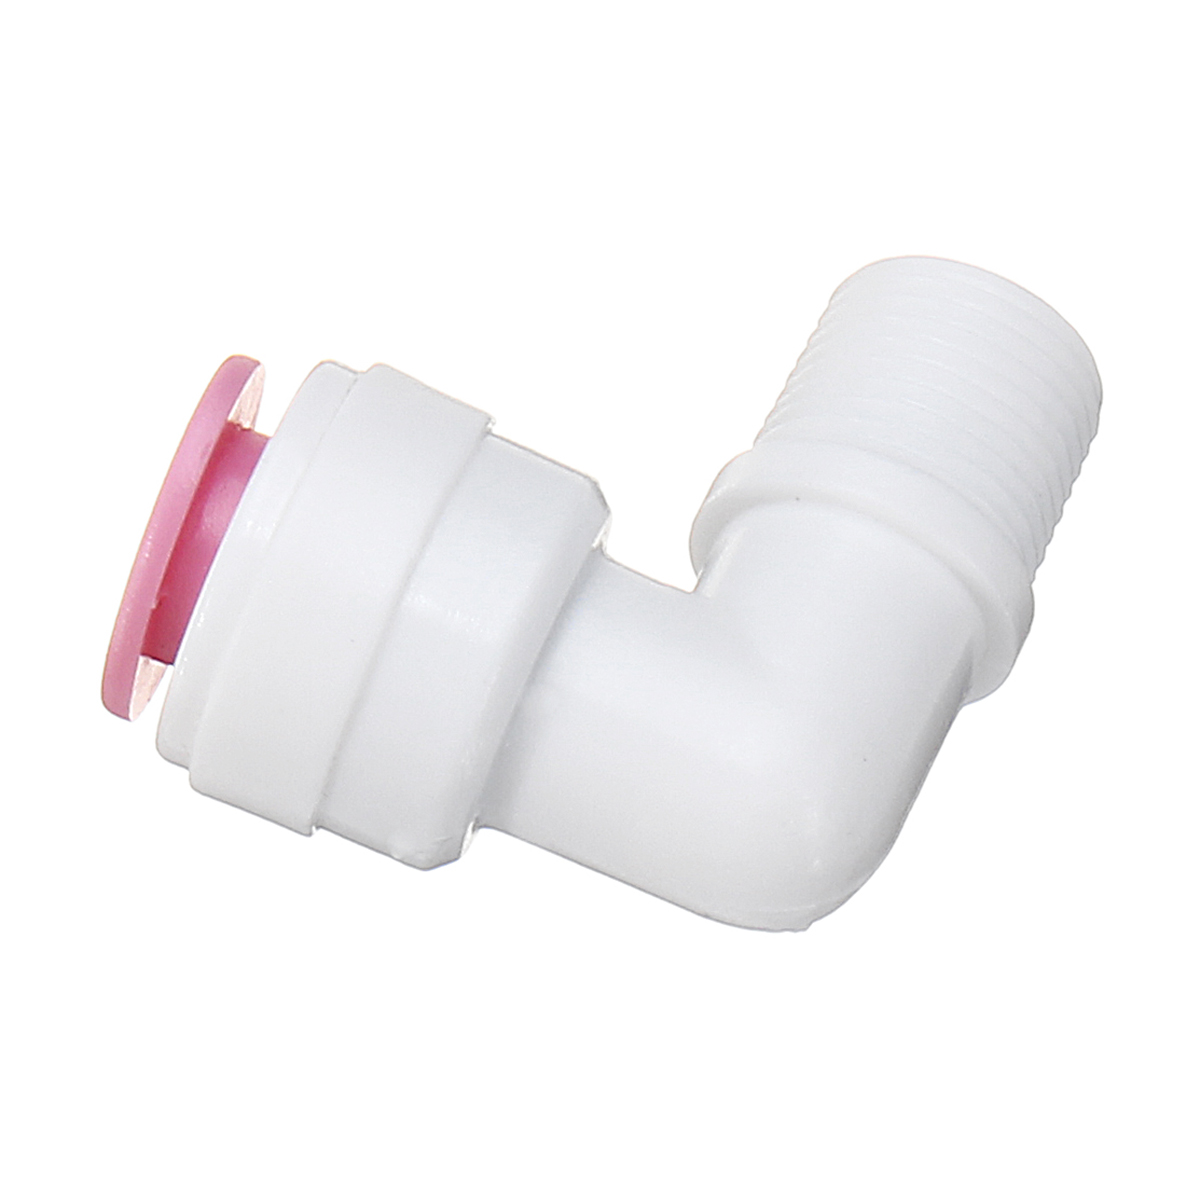 14-18-Inch-RO-Grade-Water-Pipes-Fittings-Quick-Connect-Push-In-to-Connect-Water-Pipe-1378099-2